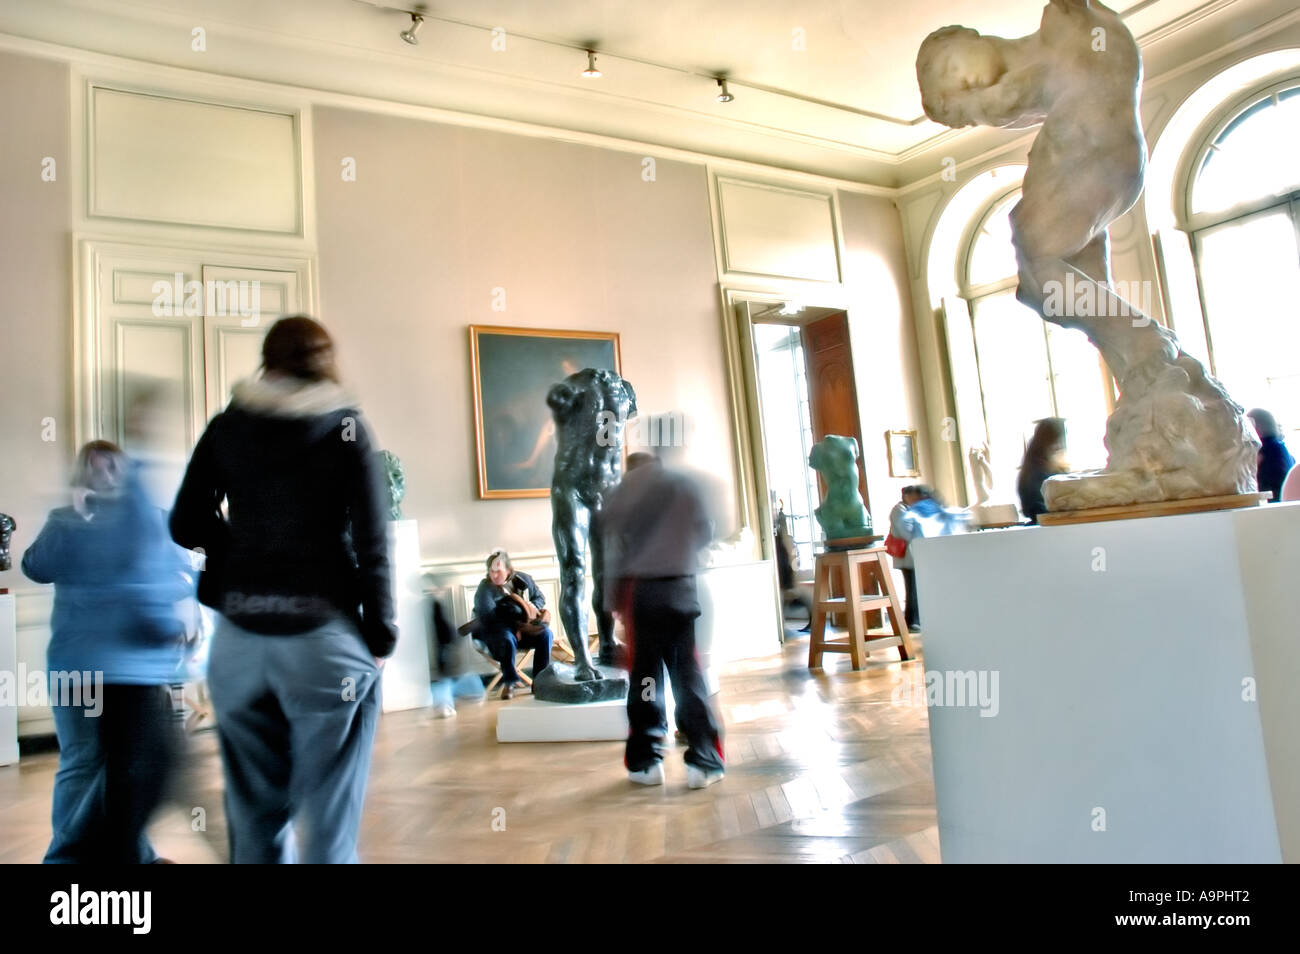 Paris France, Tourists Visiting inside Rodin Museum 'Musee National Rodin' Modern Sculpture Fine Art Gallery statues Stock Photo